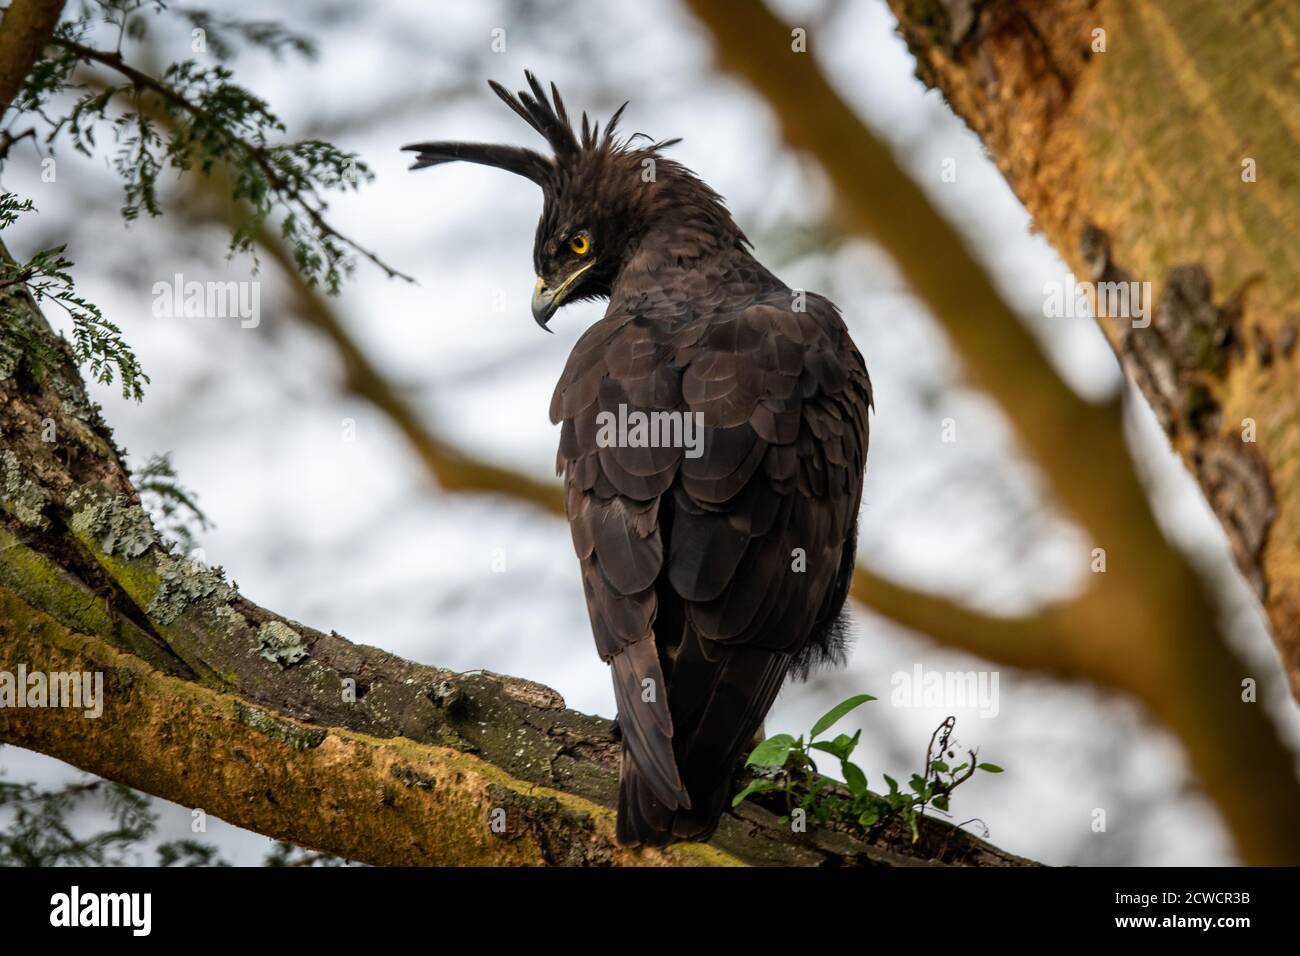 Long-crested eagle (Lophaetus occipitalis) perched in a tree in Kenya Stock Photo